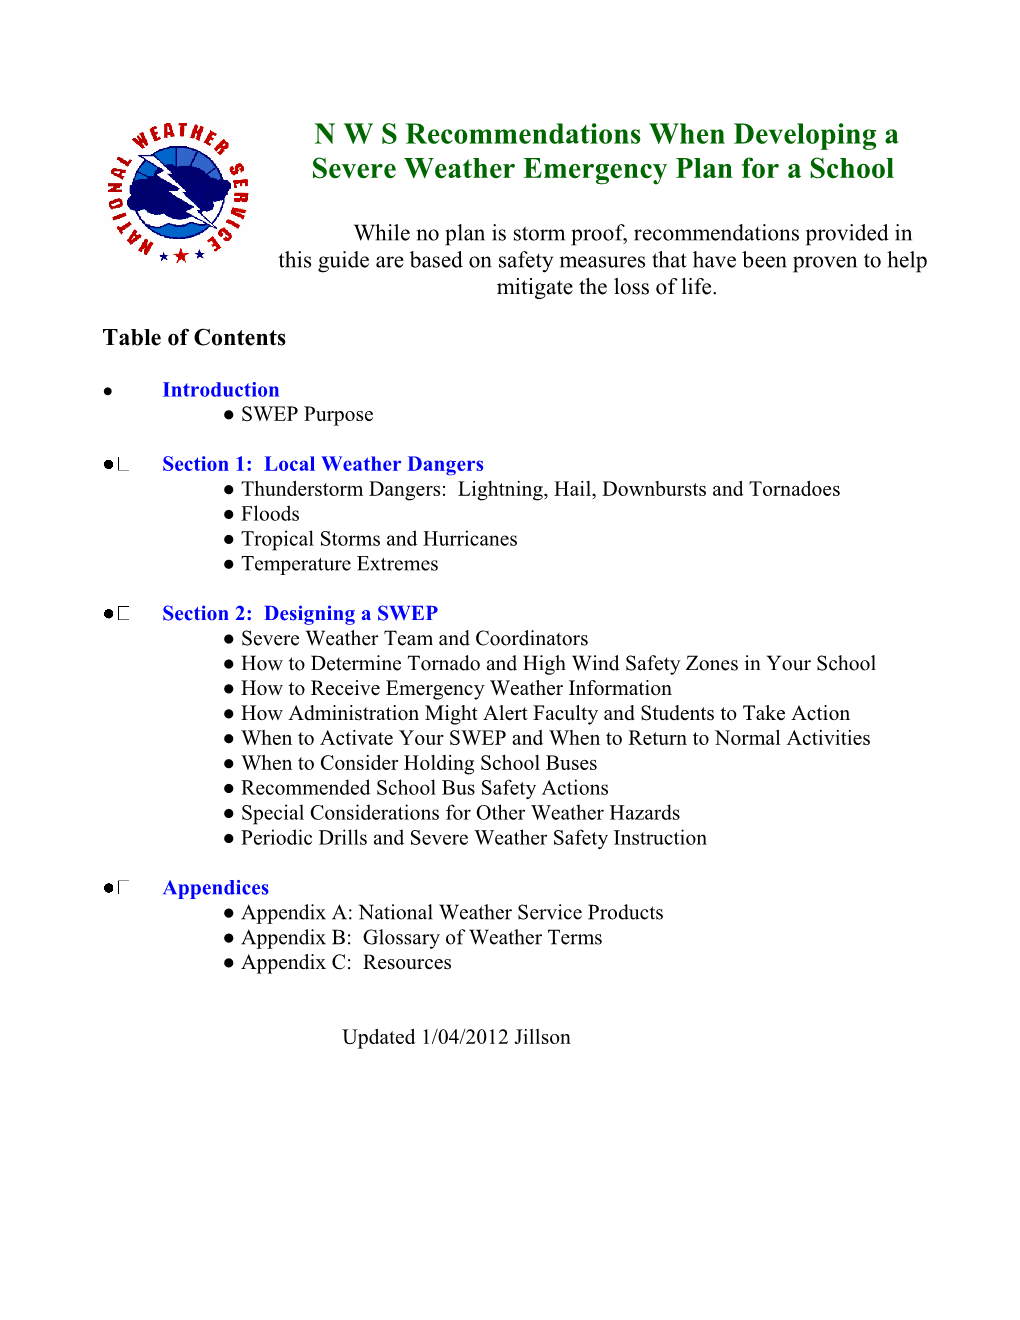 NWS Recommendations When Developing a Severe Weather Emergency Plan for a School